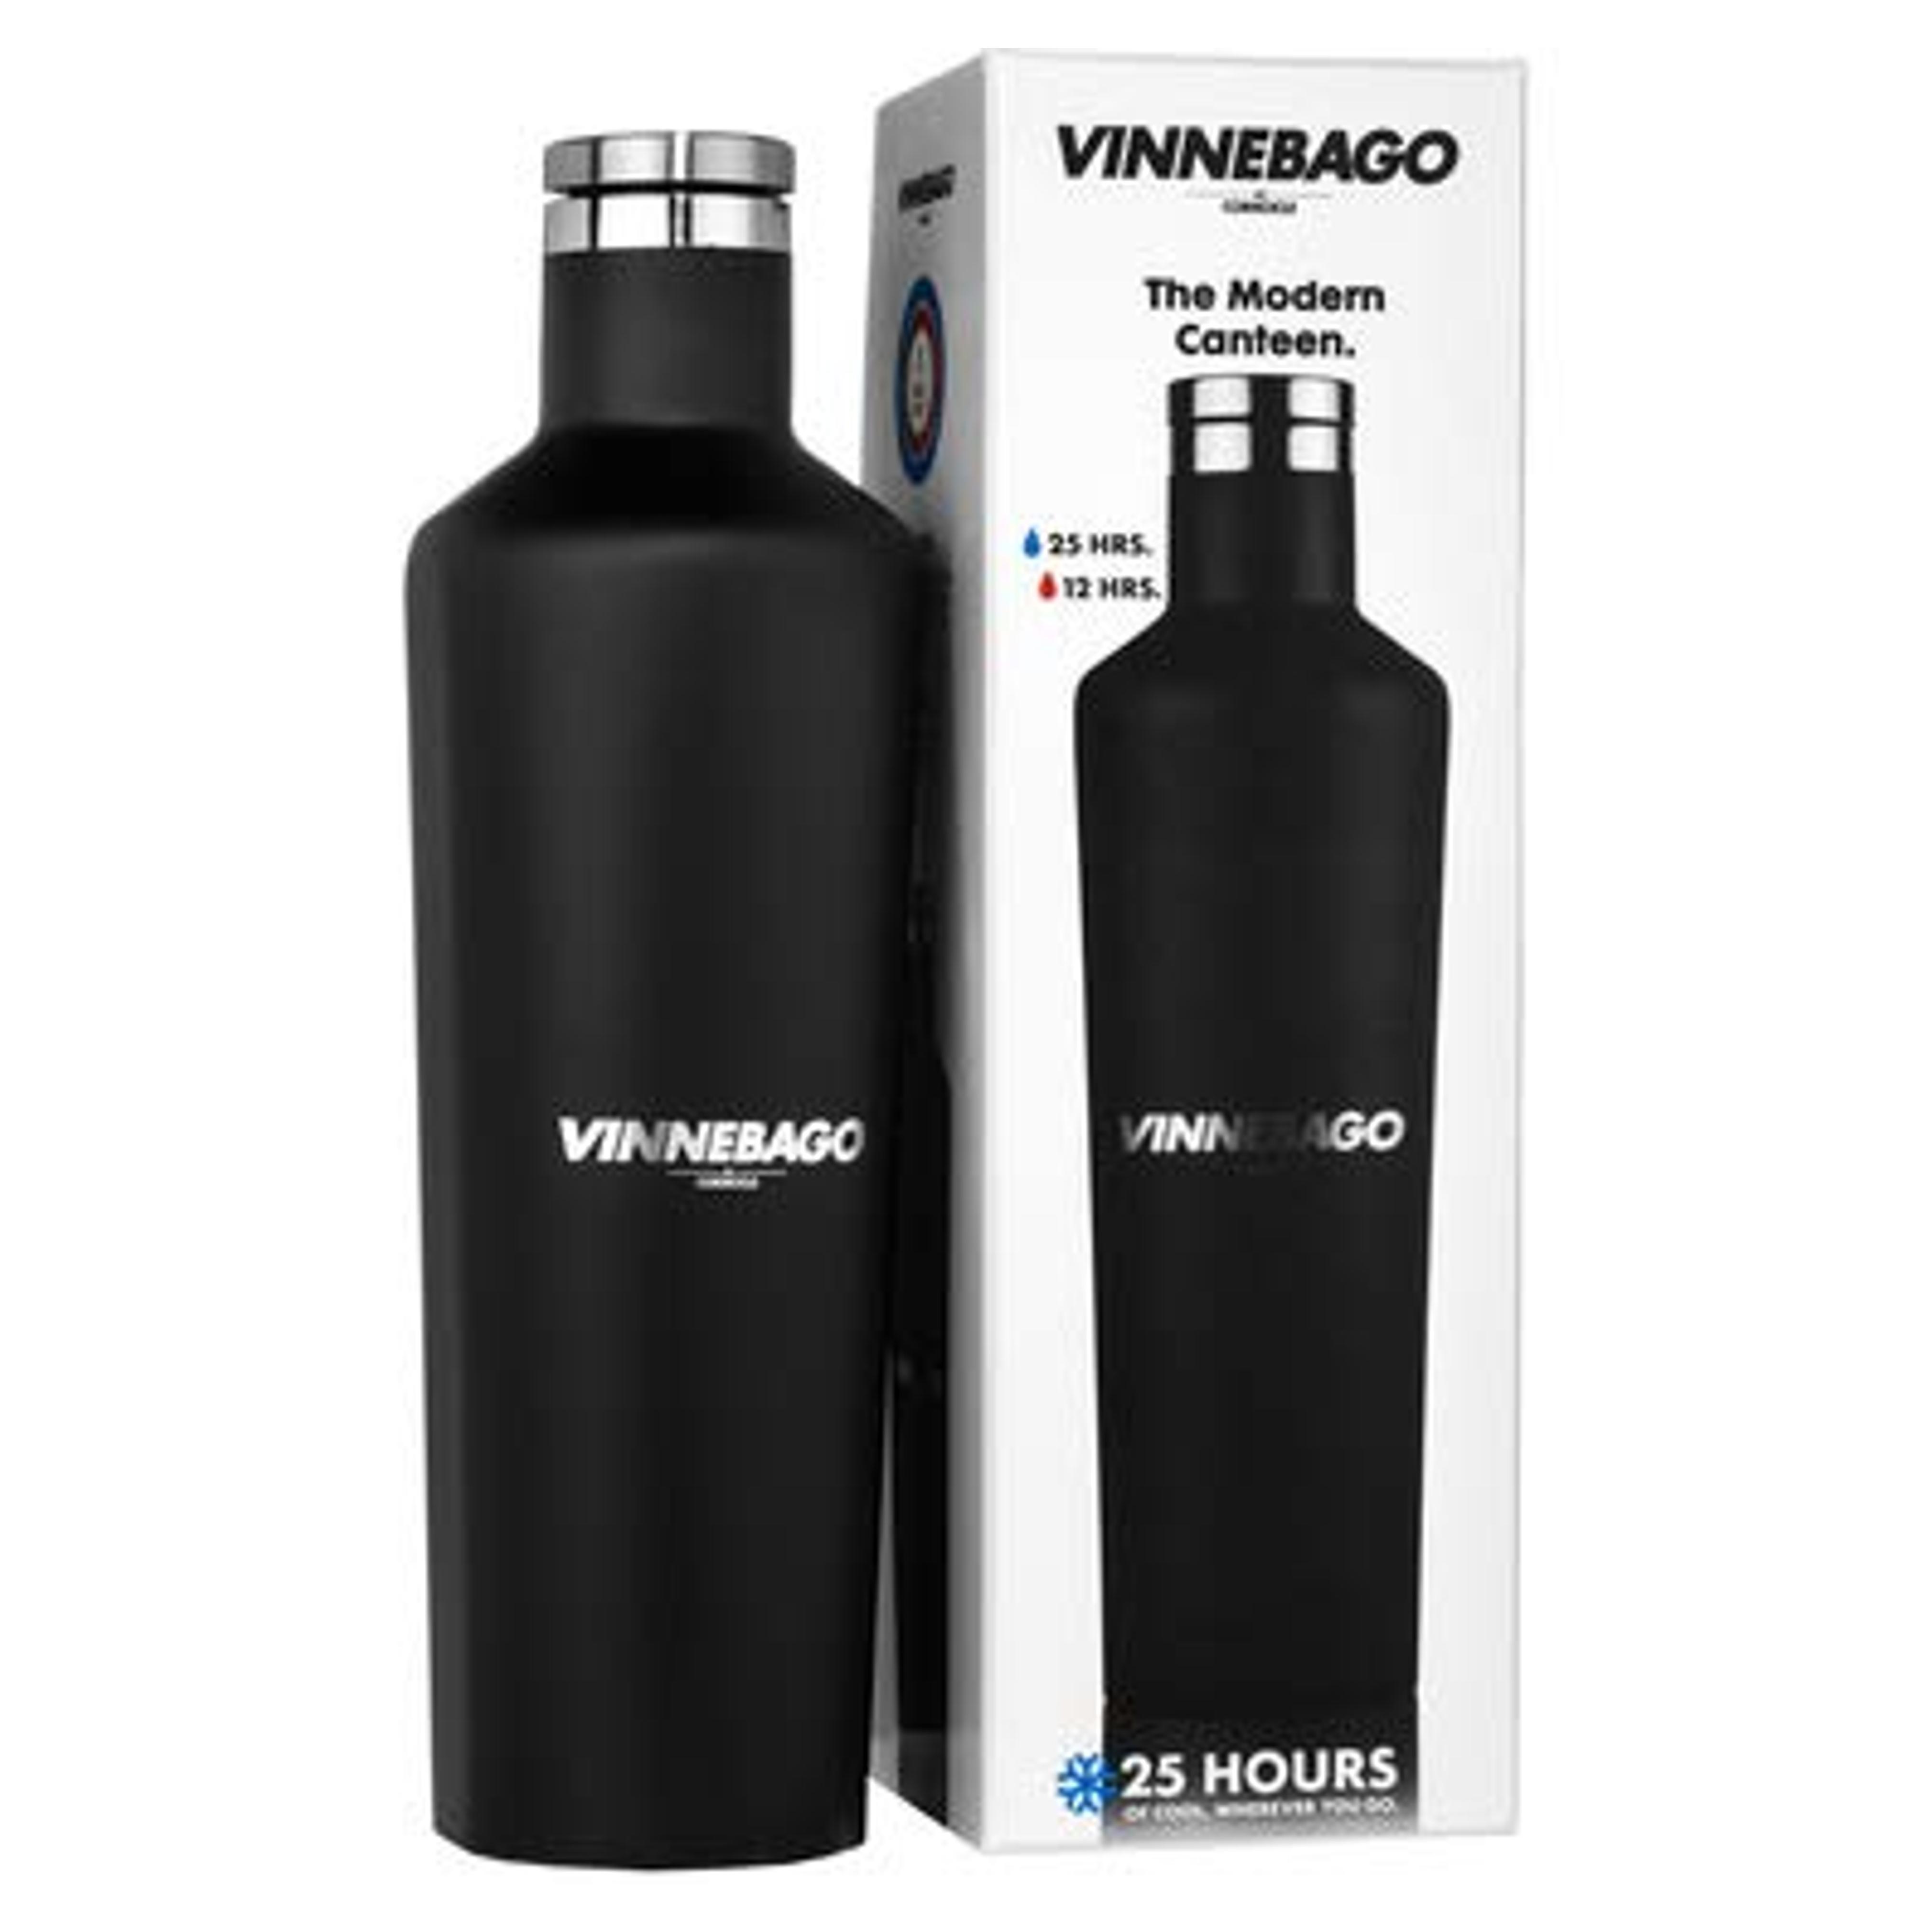 Corkcicle Vinnebago Insulated Stainless Steel Bottle/Thermos, 750ml, Black